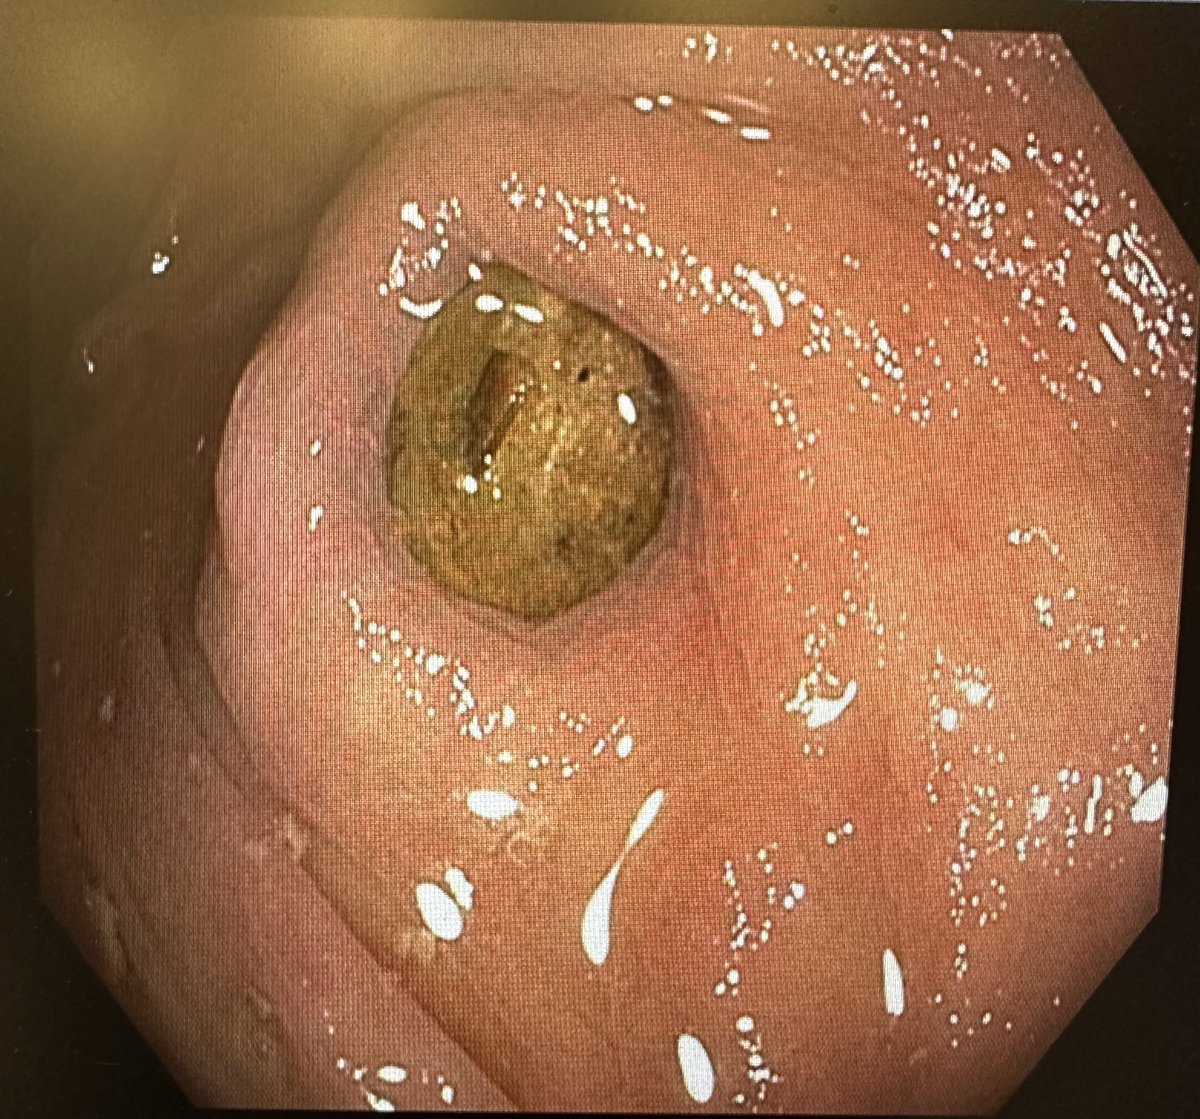 What triggers appendicitis? Despite common belief, definitely NOT stool impaction in the appendix as seen here in this perfectly healthy patient!